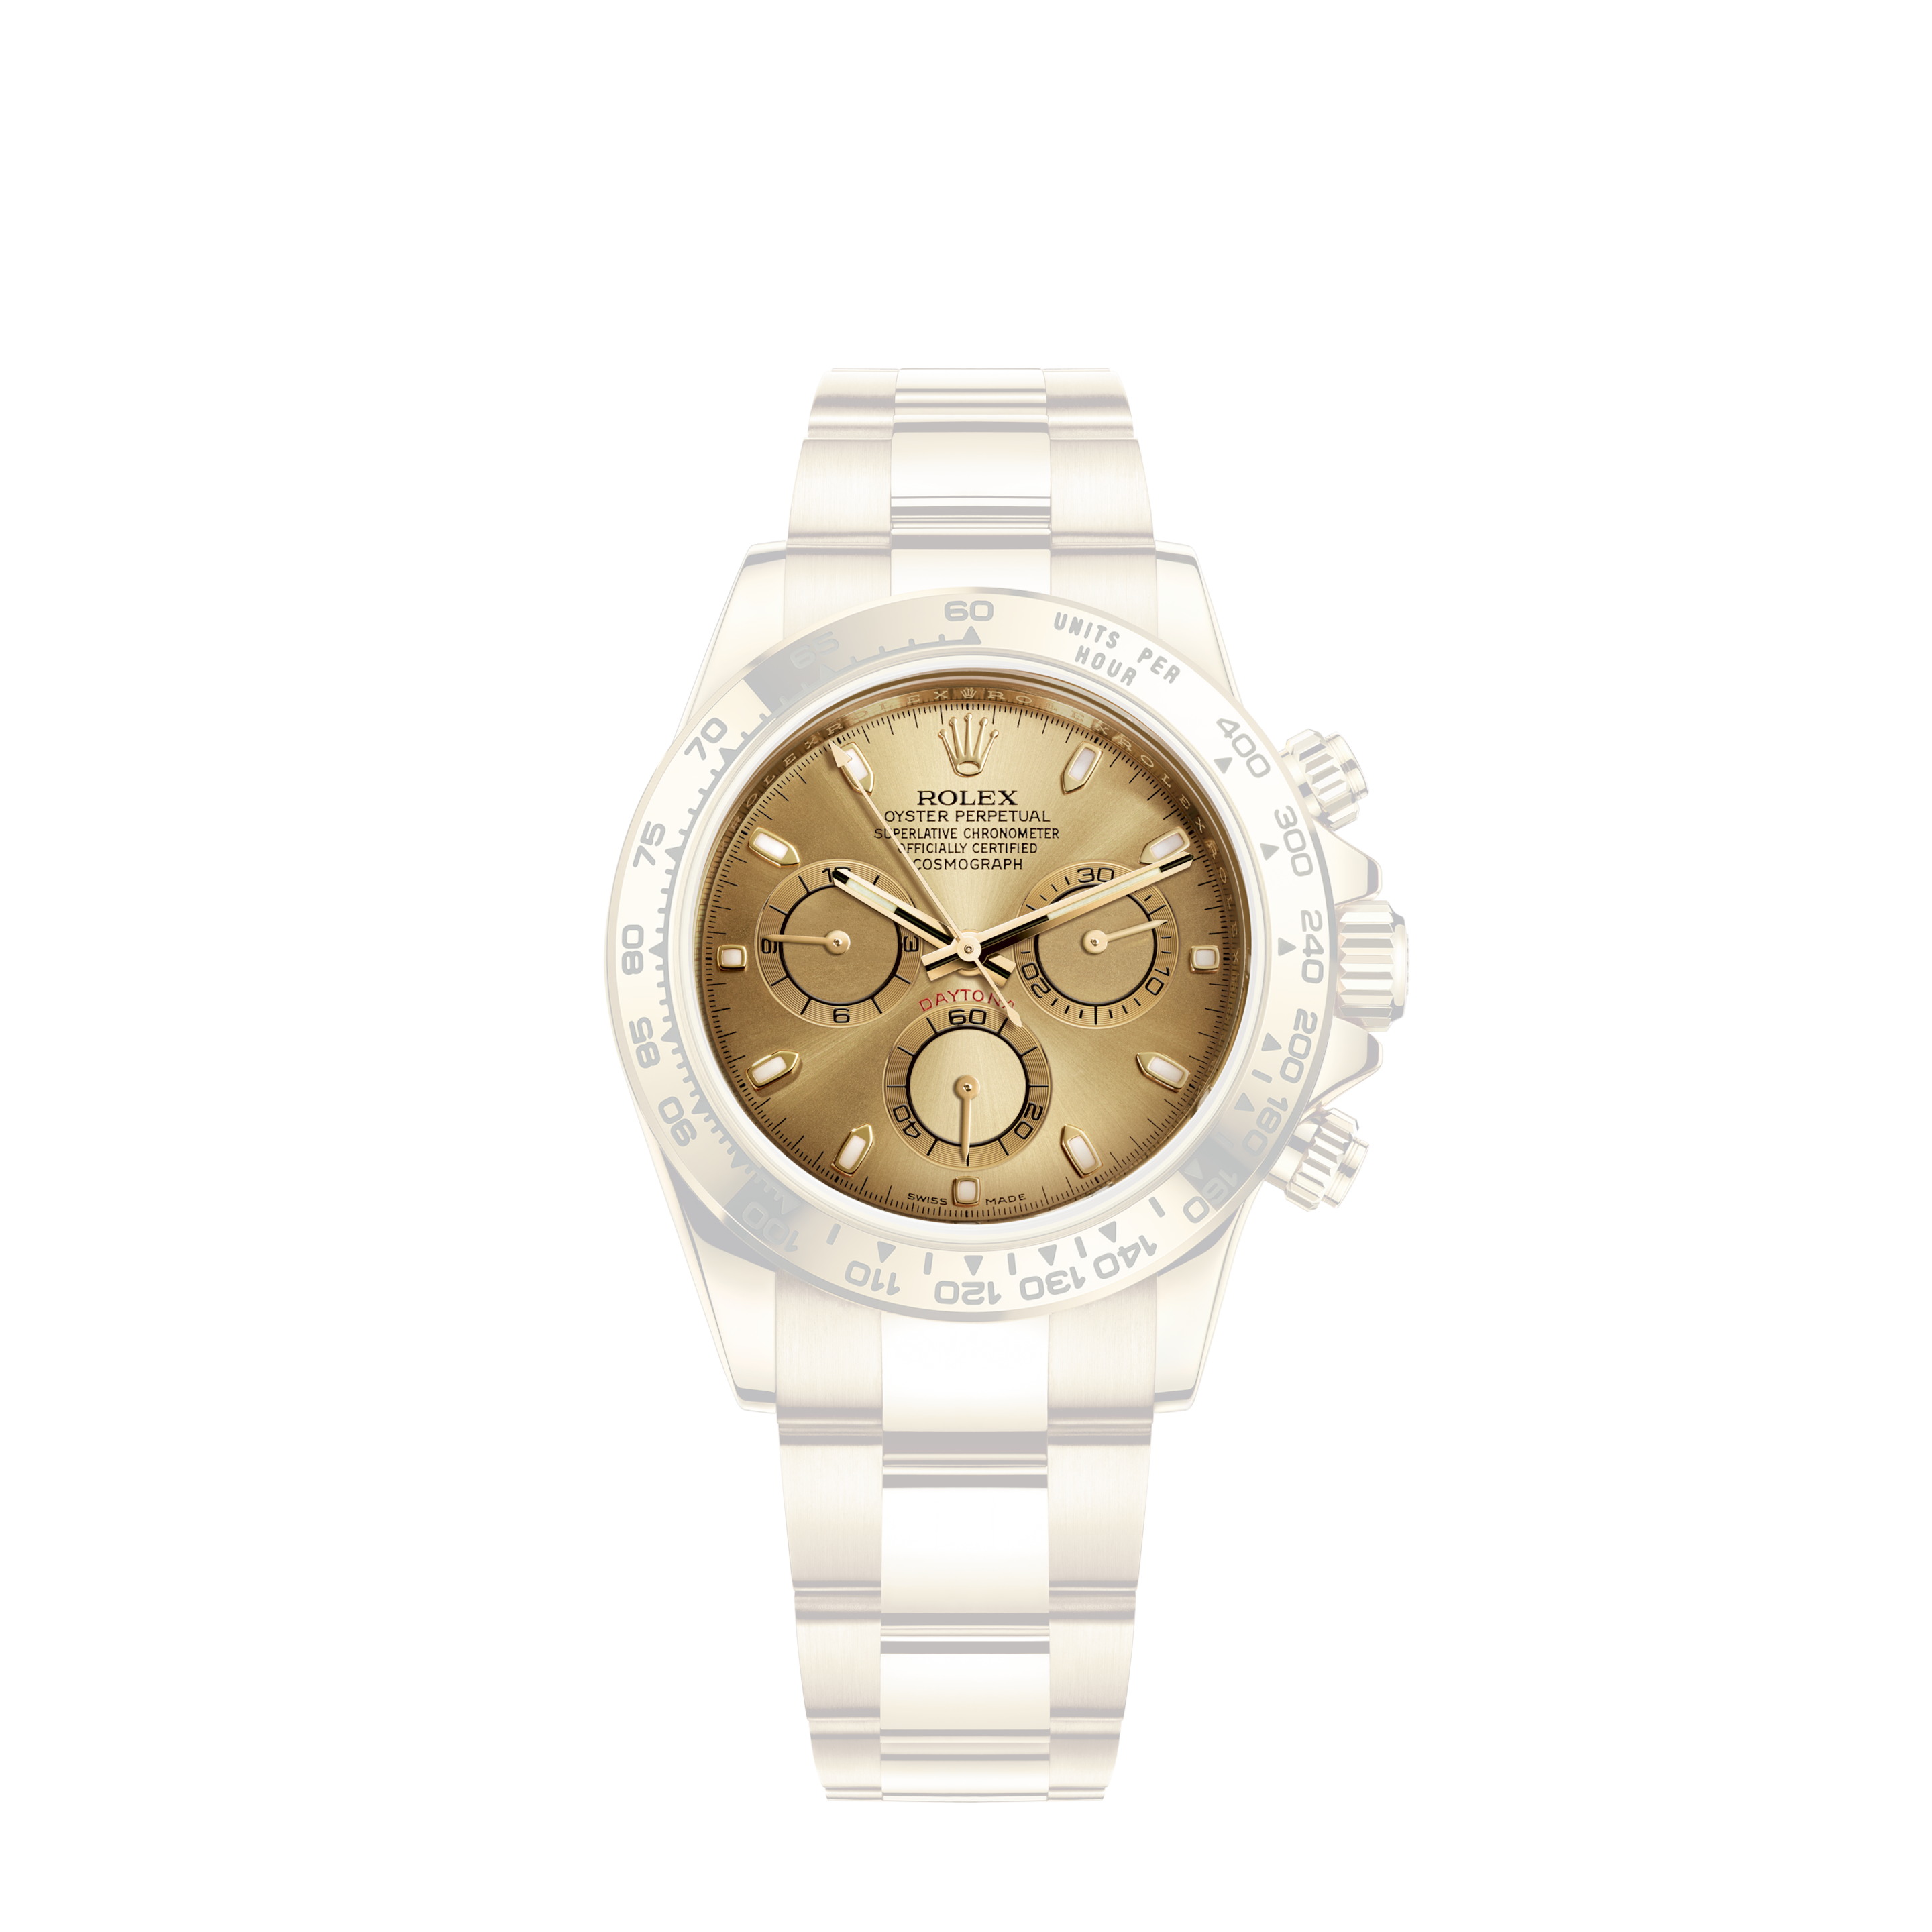 Rolex Midsize Steel & Gold 2 Tone Oyster Perpetual 67513Rolex Midsize Yacht - Master 35mm Two-Tone Watch 68623